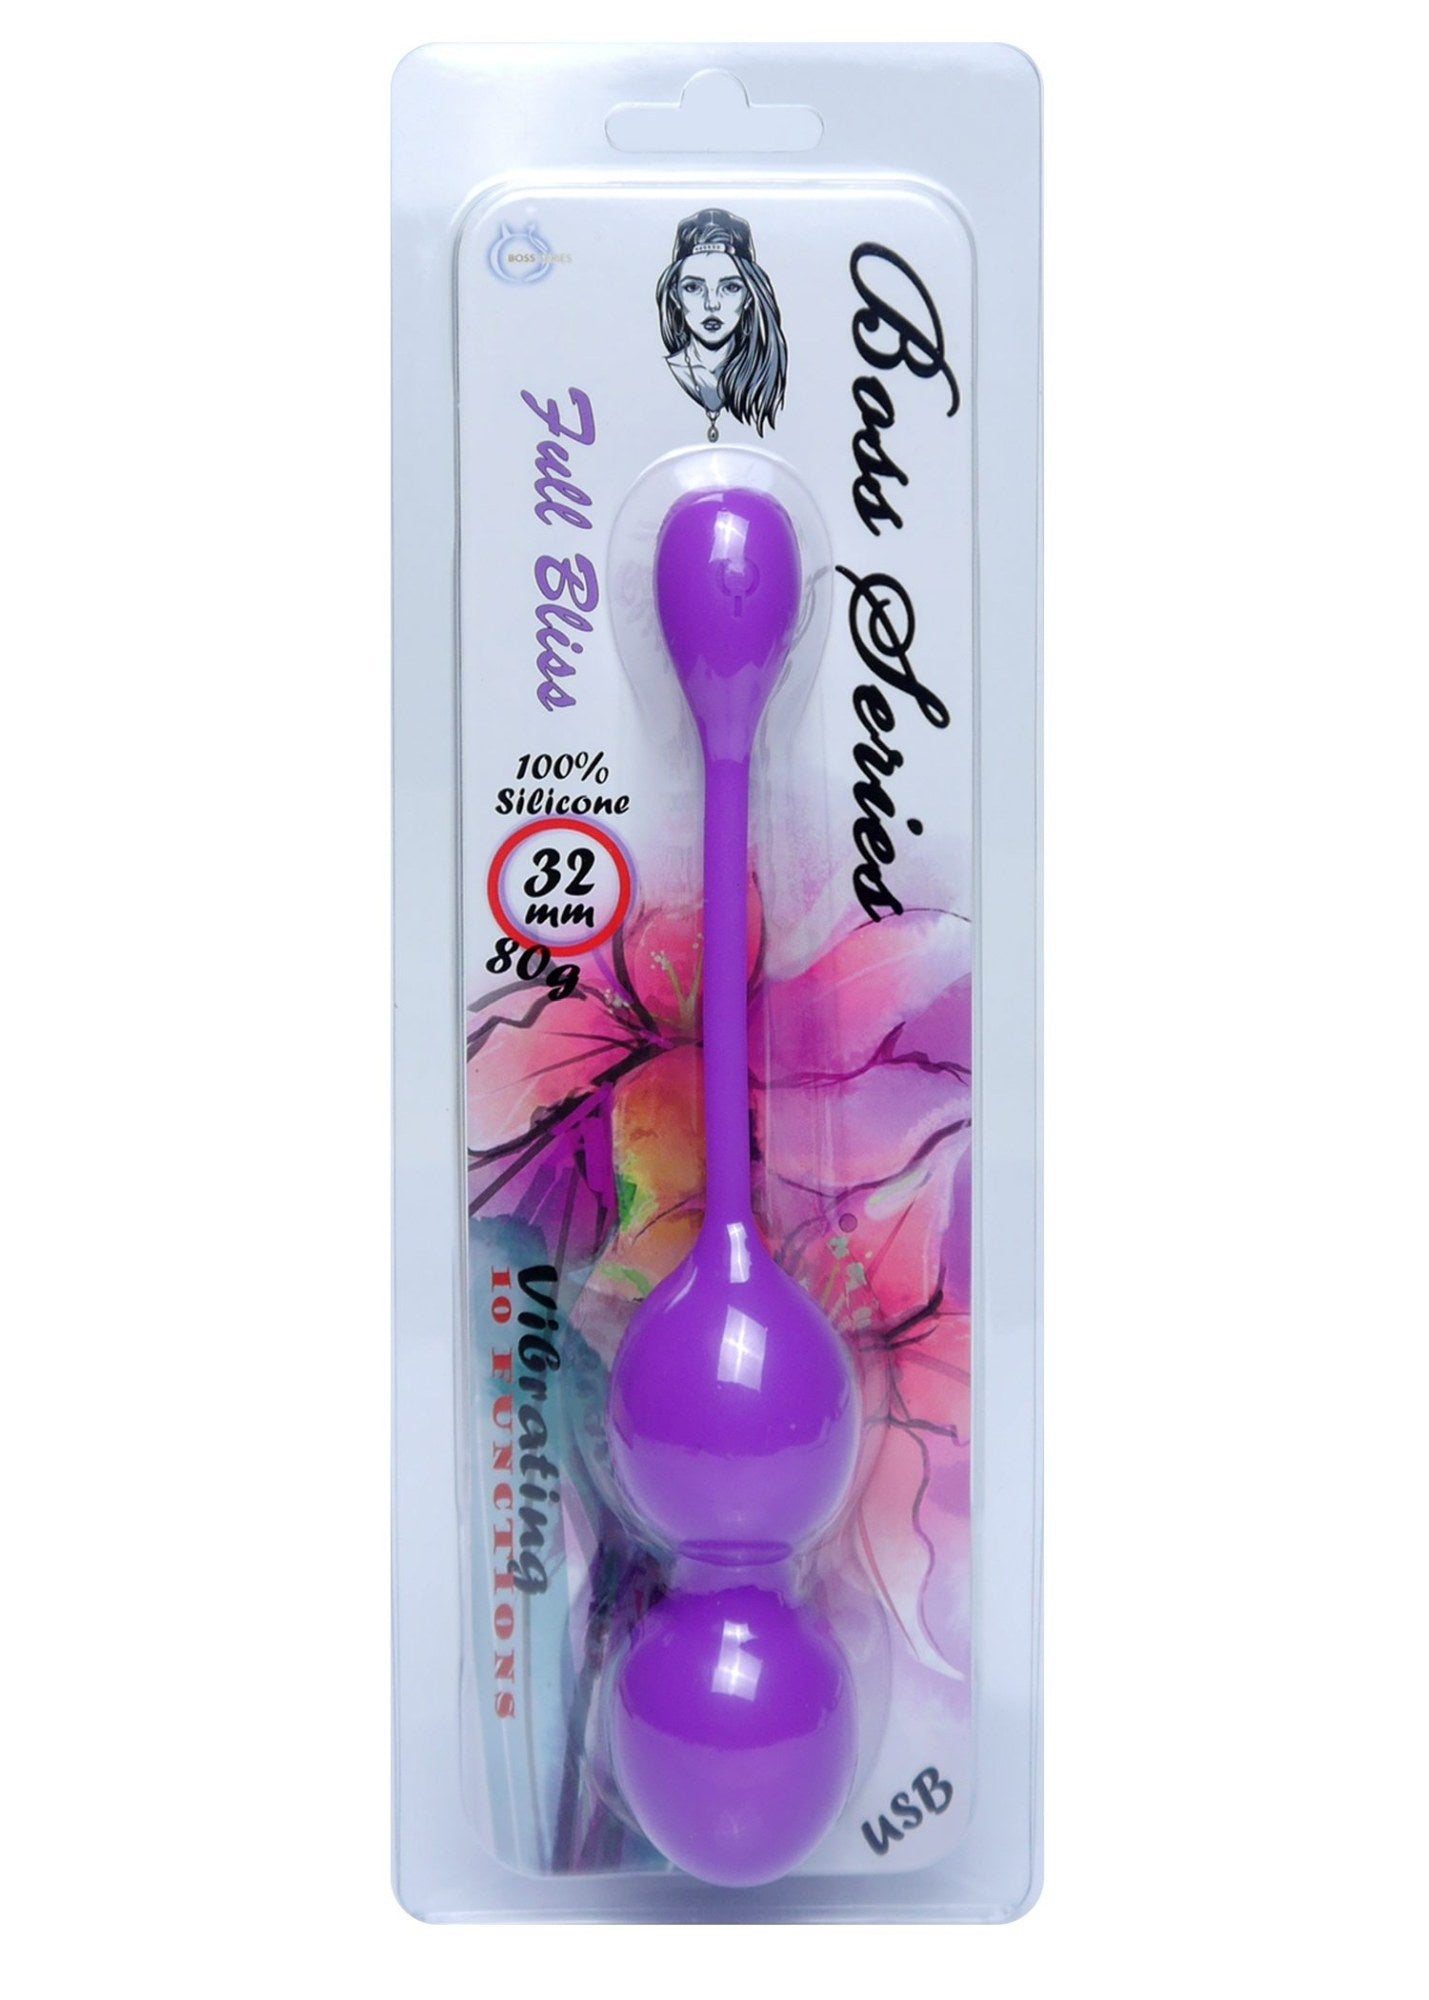 Bossoftoys - 75-00014 - Silicone Kegel Balls - length 16,5 cm - width  32mm  - 80g - 10 functions - Purple - strong blister